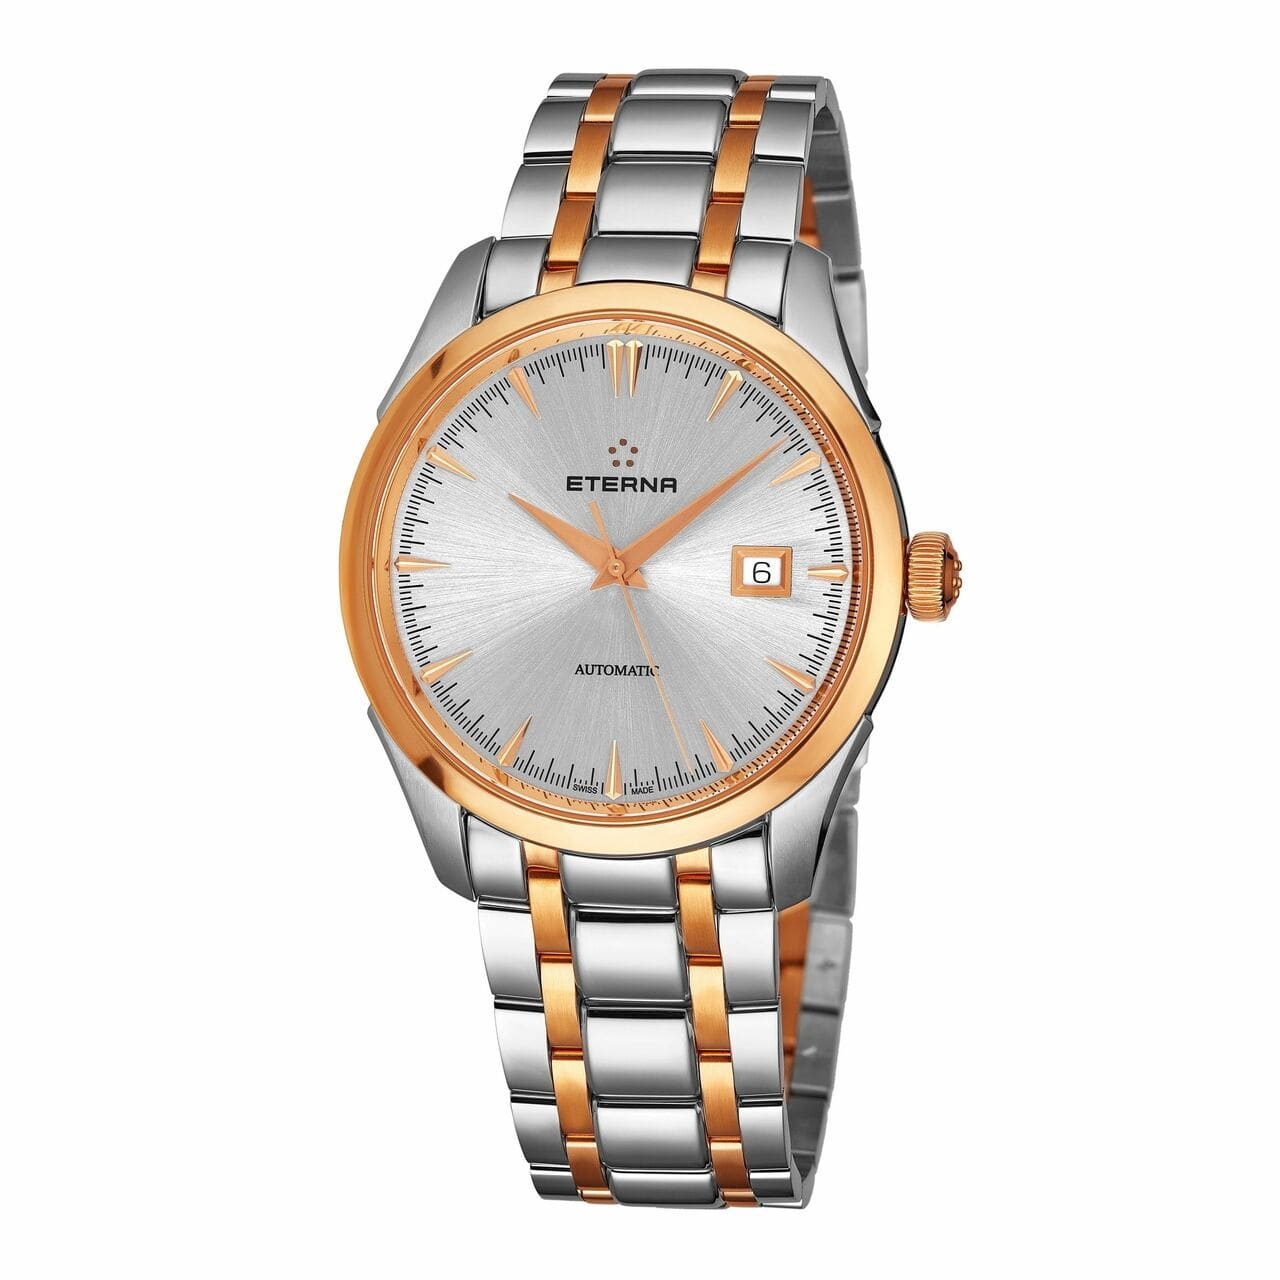 Eterna 2951.53.11.1701 Eternity Two Tone Stainless Steel Silver Dial Men's Automatic Watch 794504368444